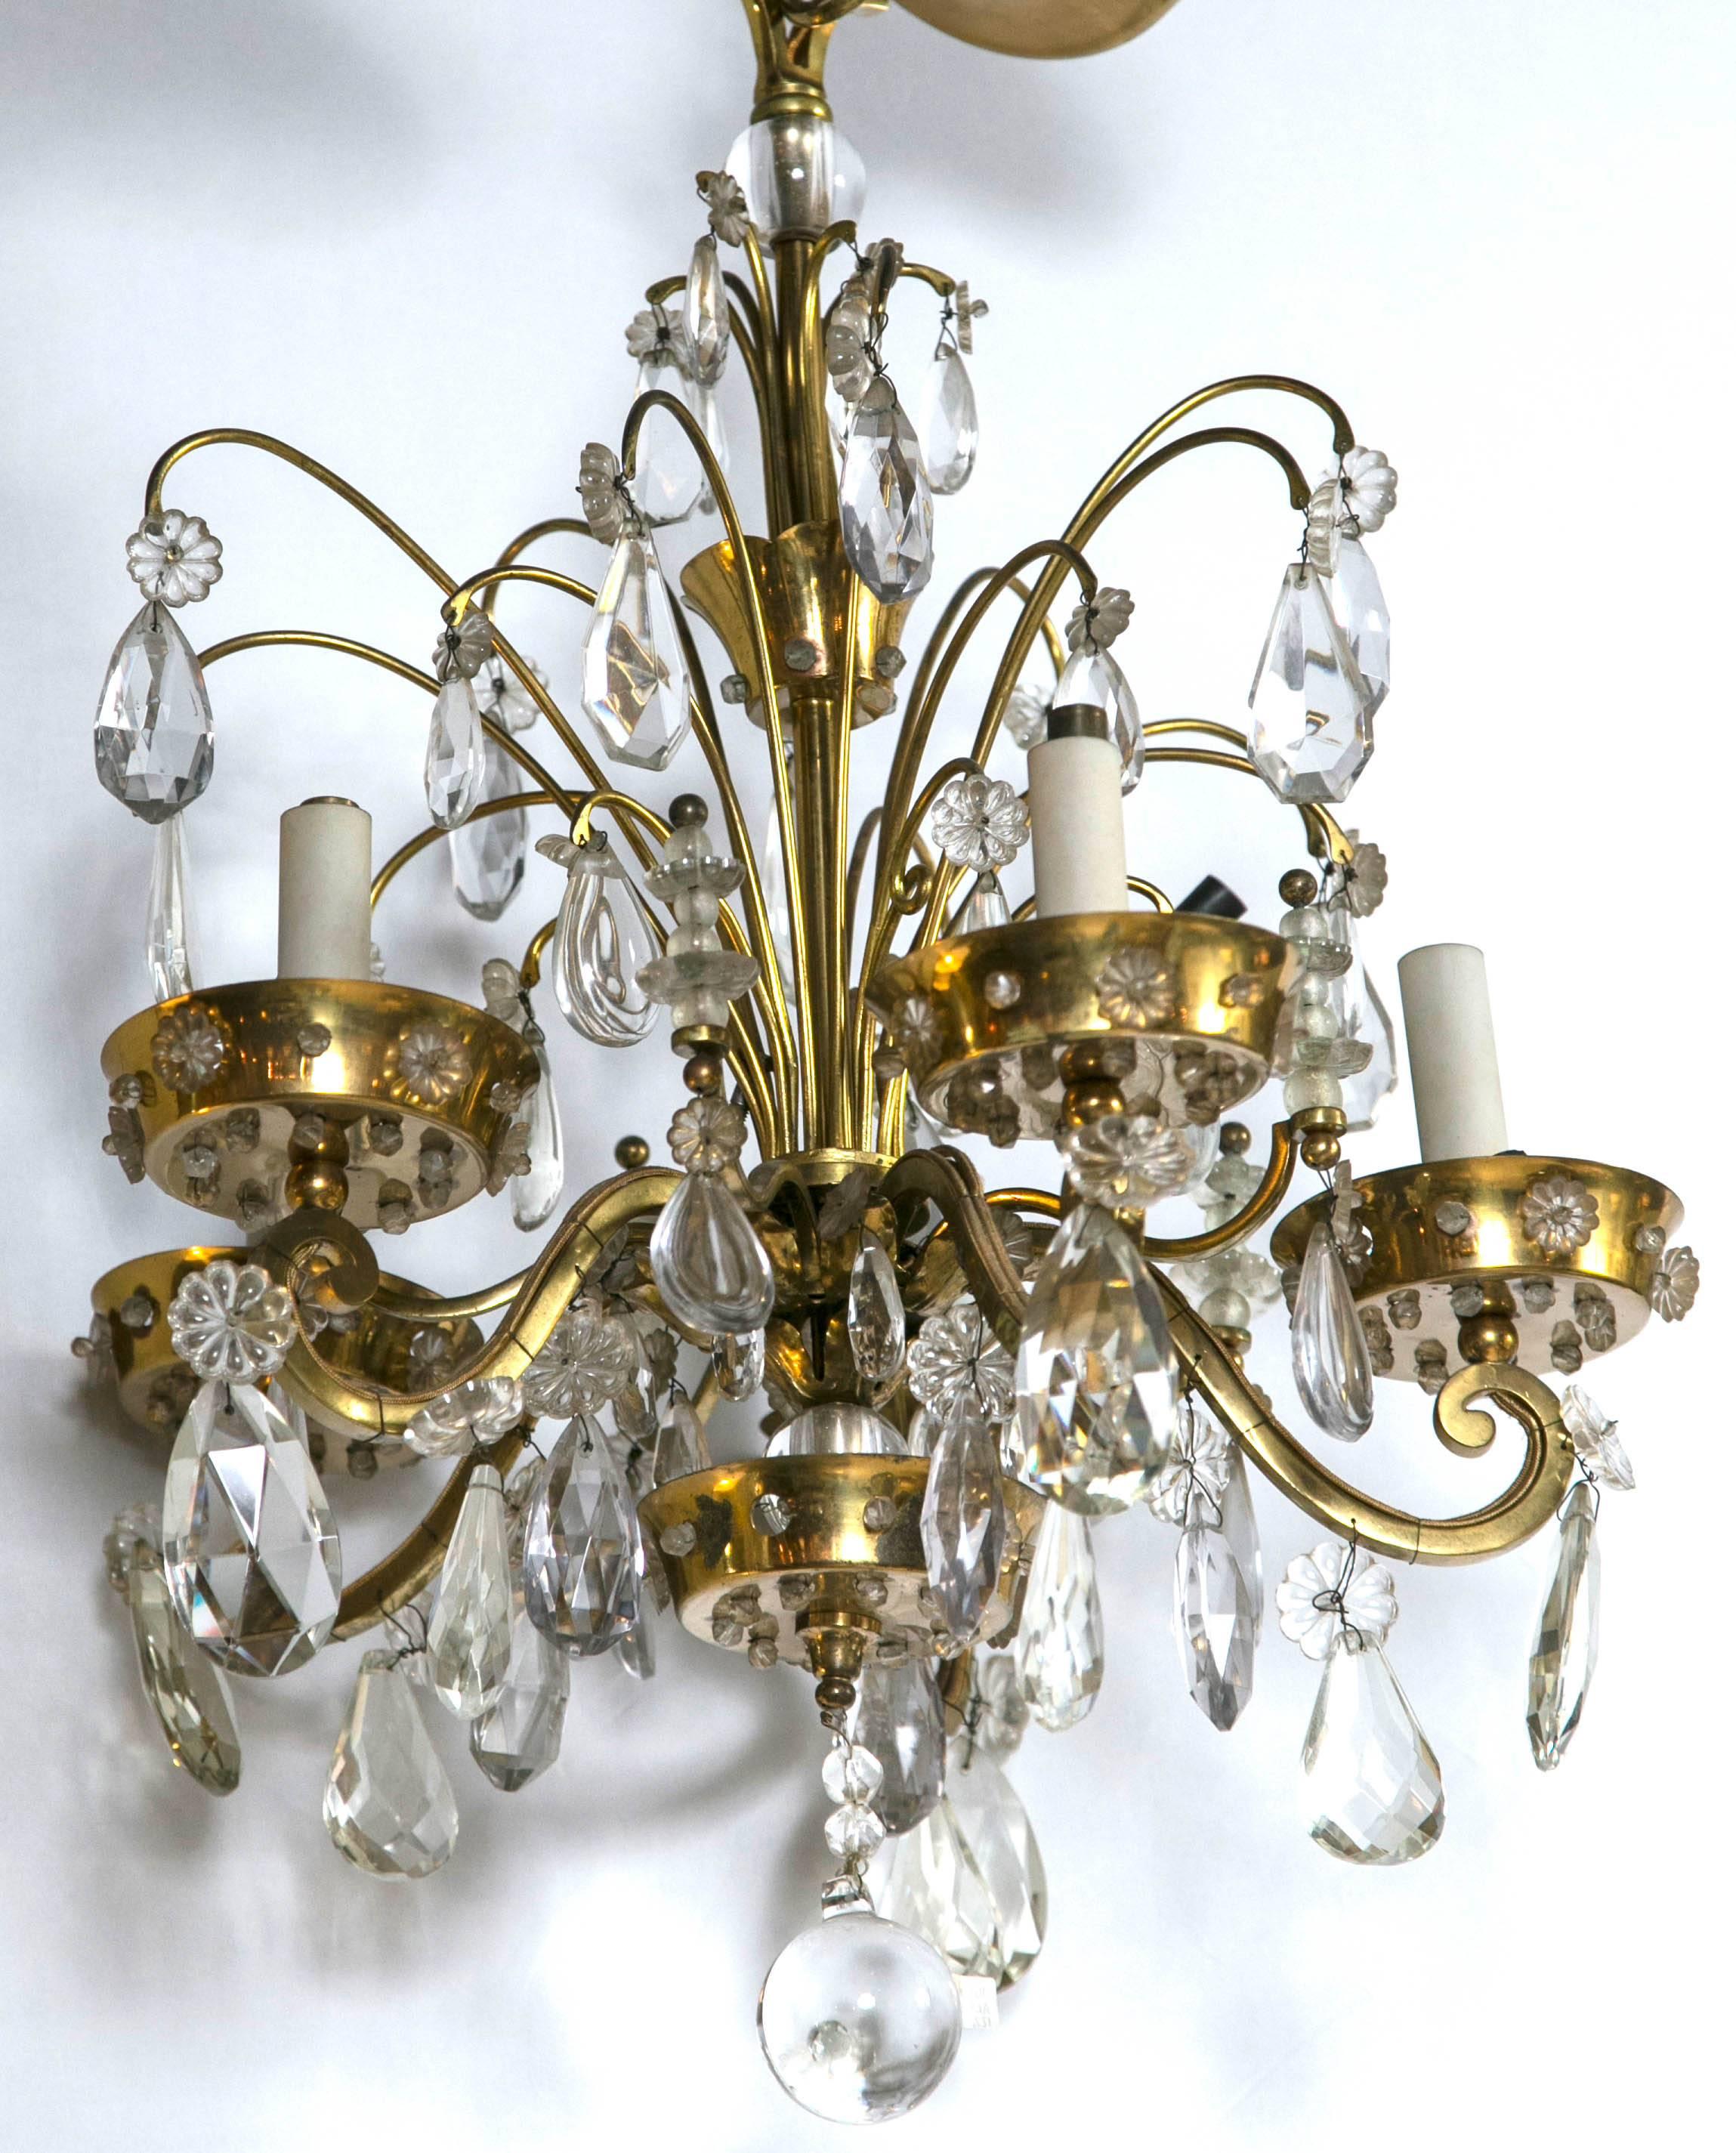 A Fine Bronze And Crystal French Art Deco Chandelier by Maison Jansen Five Arm 3